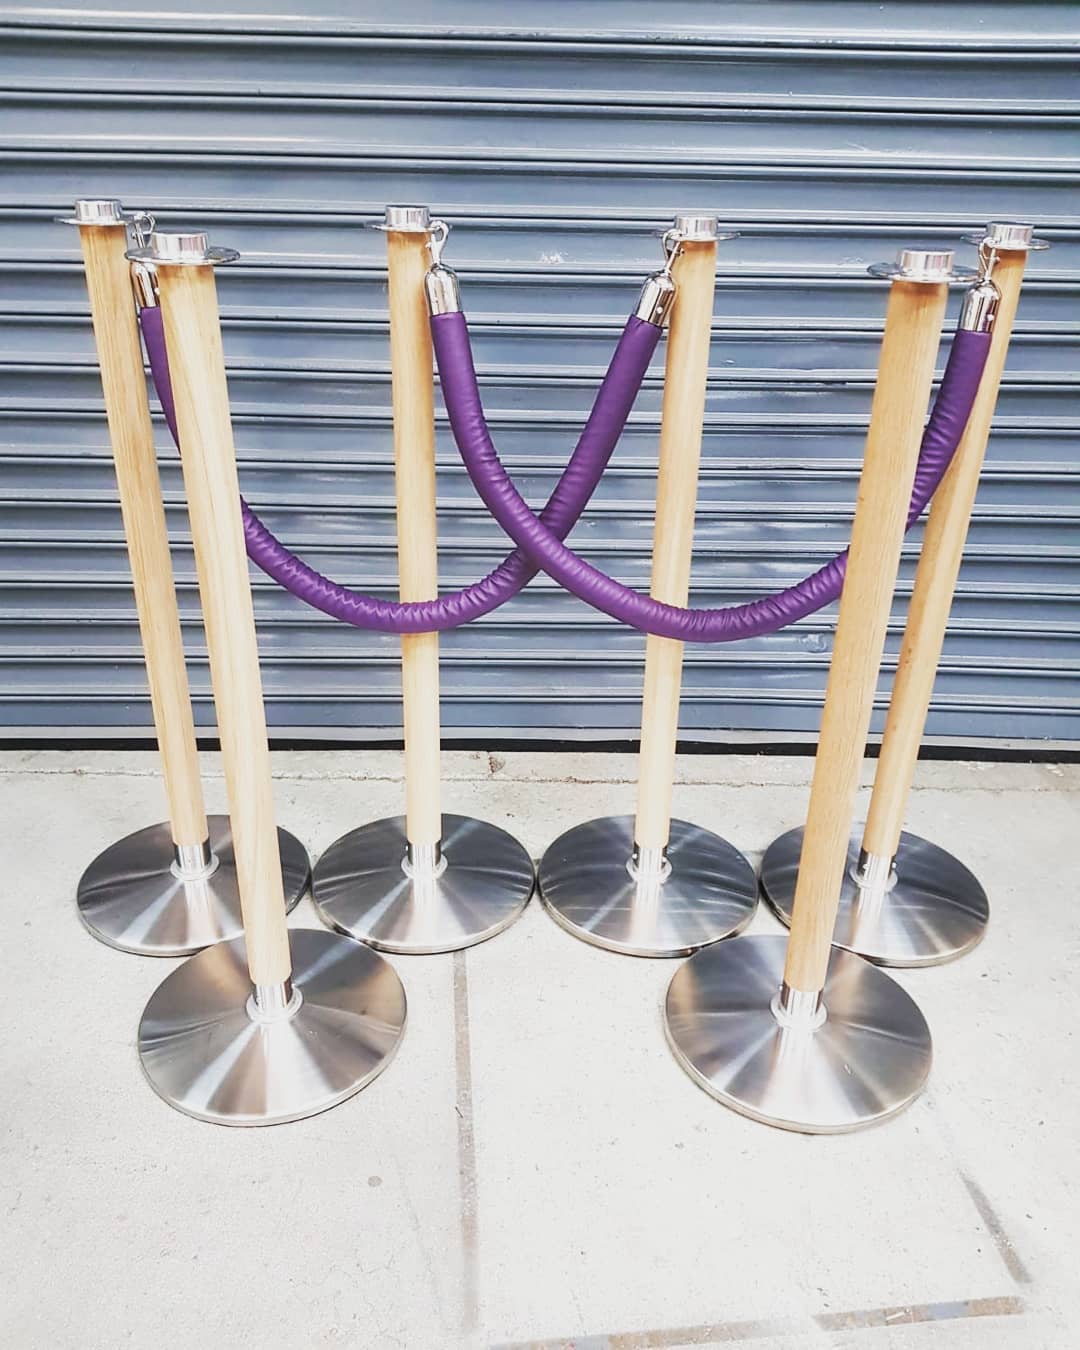 Natural Wooden Cafe Barrier Posts with Round Base & Naugahyde Leather Rope in Purple